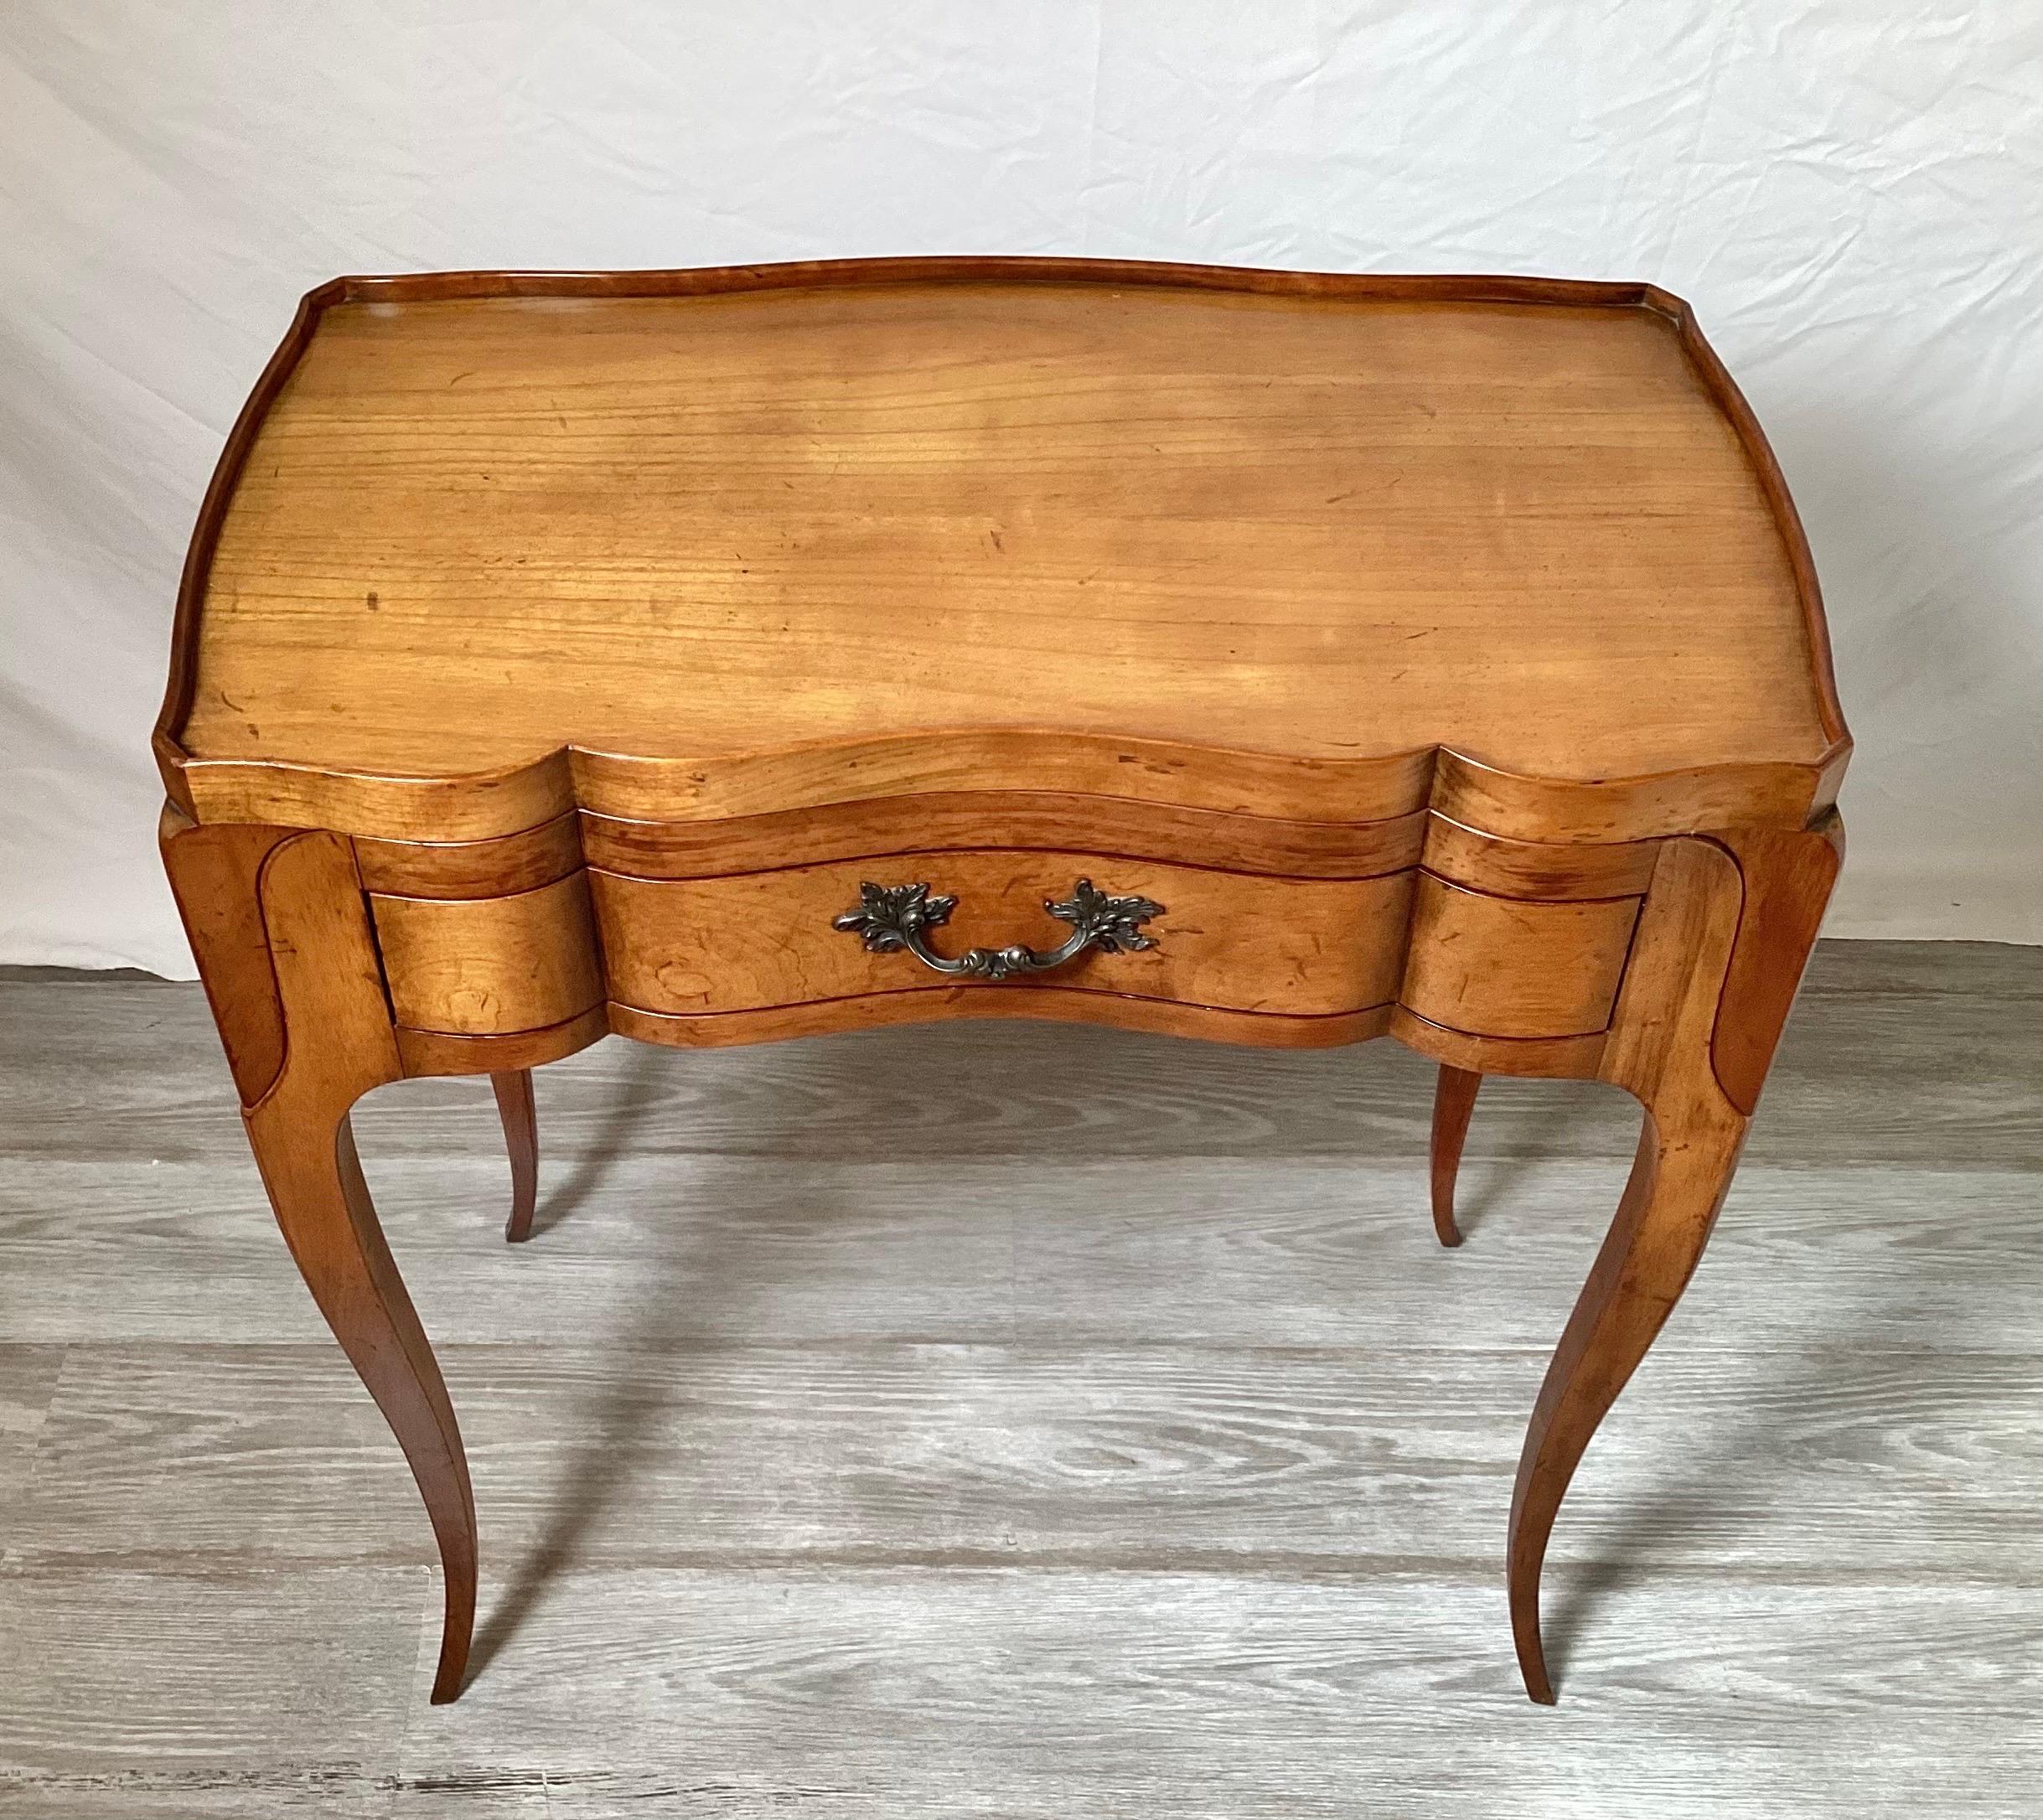 Elegant and beautifully made French style tray top table by Baker Furniture. The serpentine shape with a clever built in lift able tray top with front drawer. The table with four graceful cabriole legs. The tray when lifted is 7 inches tall.